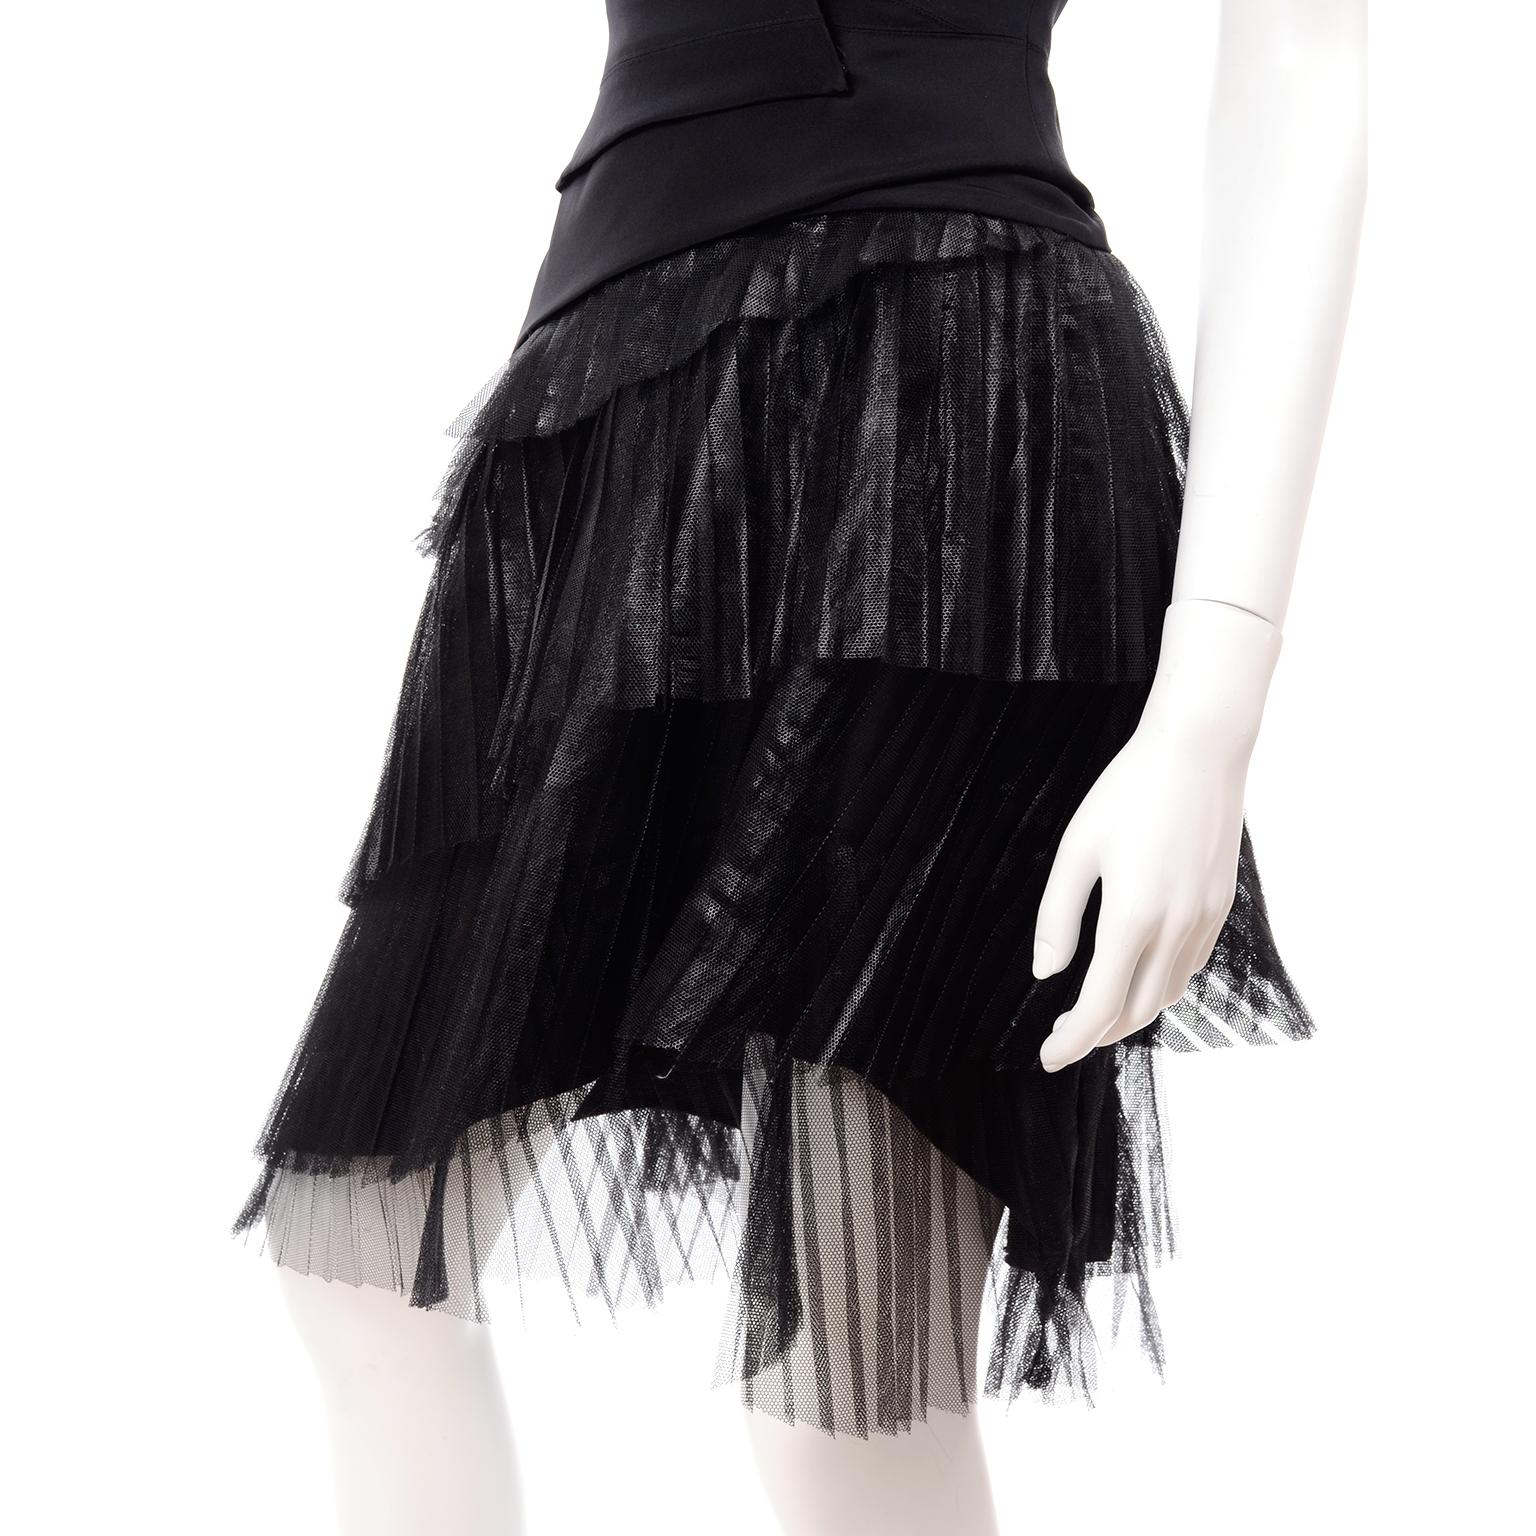 Danes Vintage Black Evening Dress With Asymmetrical Pleated Metallic Tulle Skirt For Sale 2